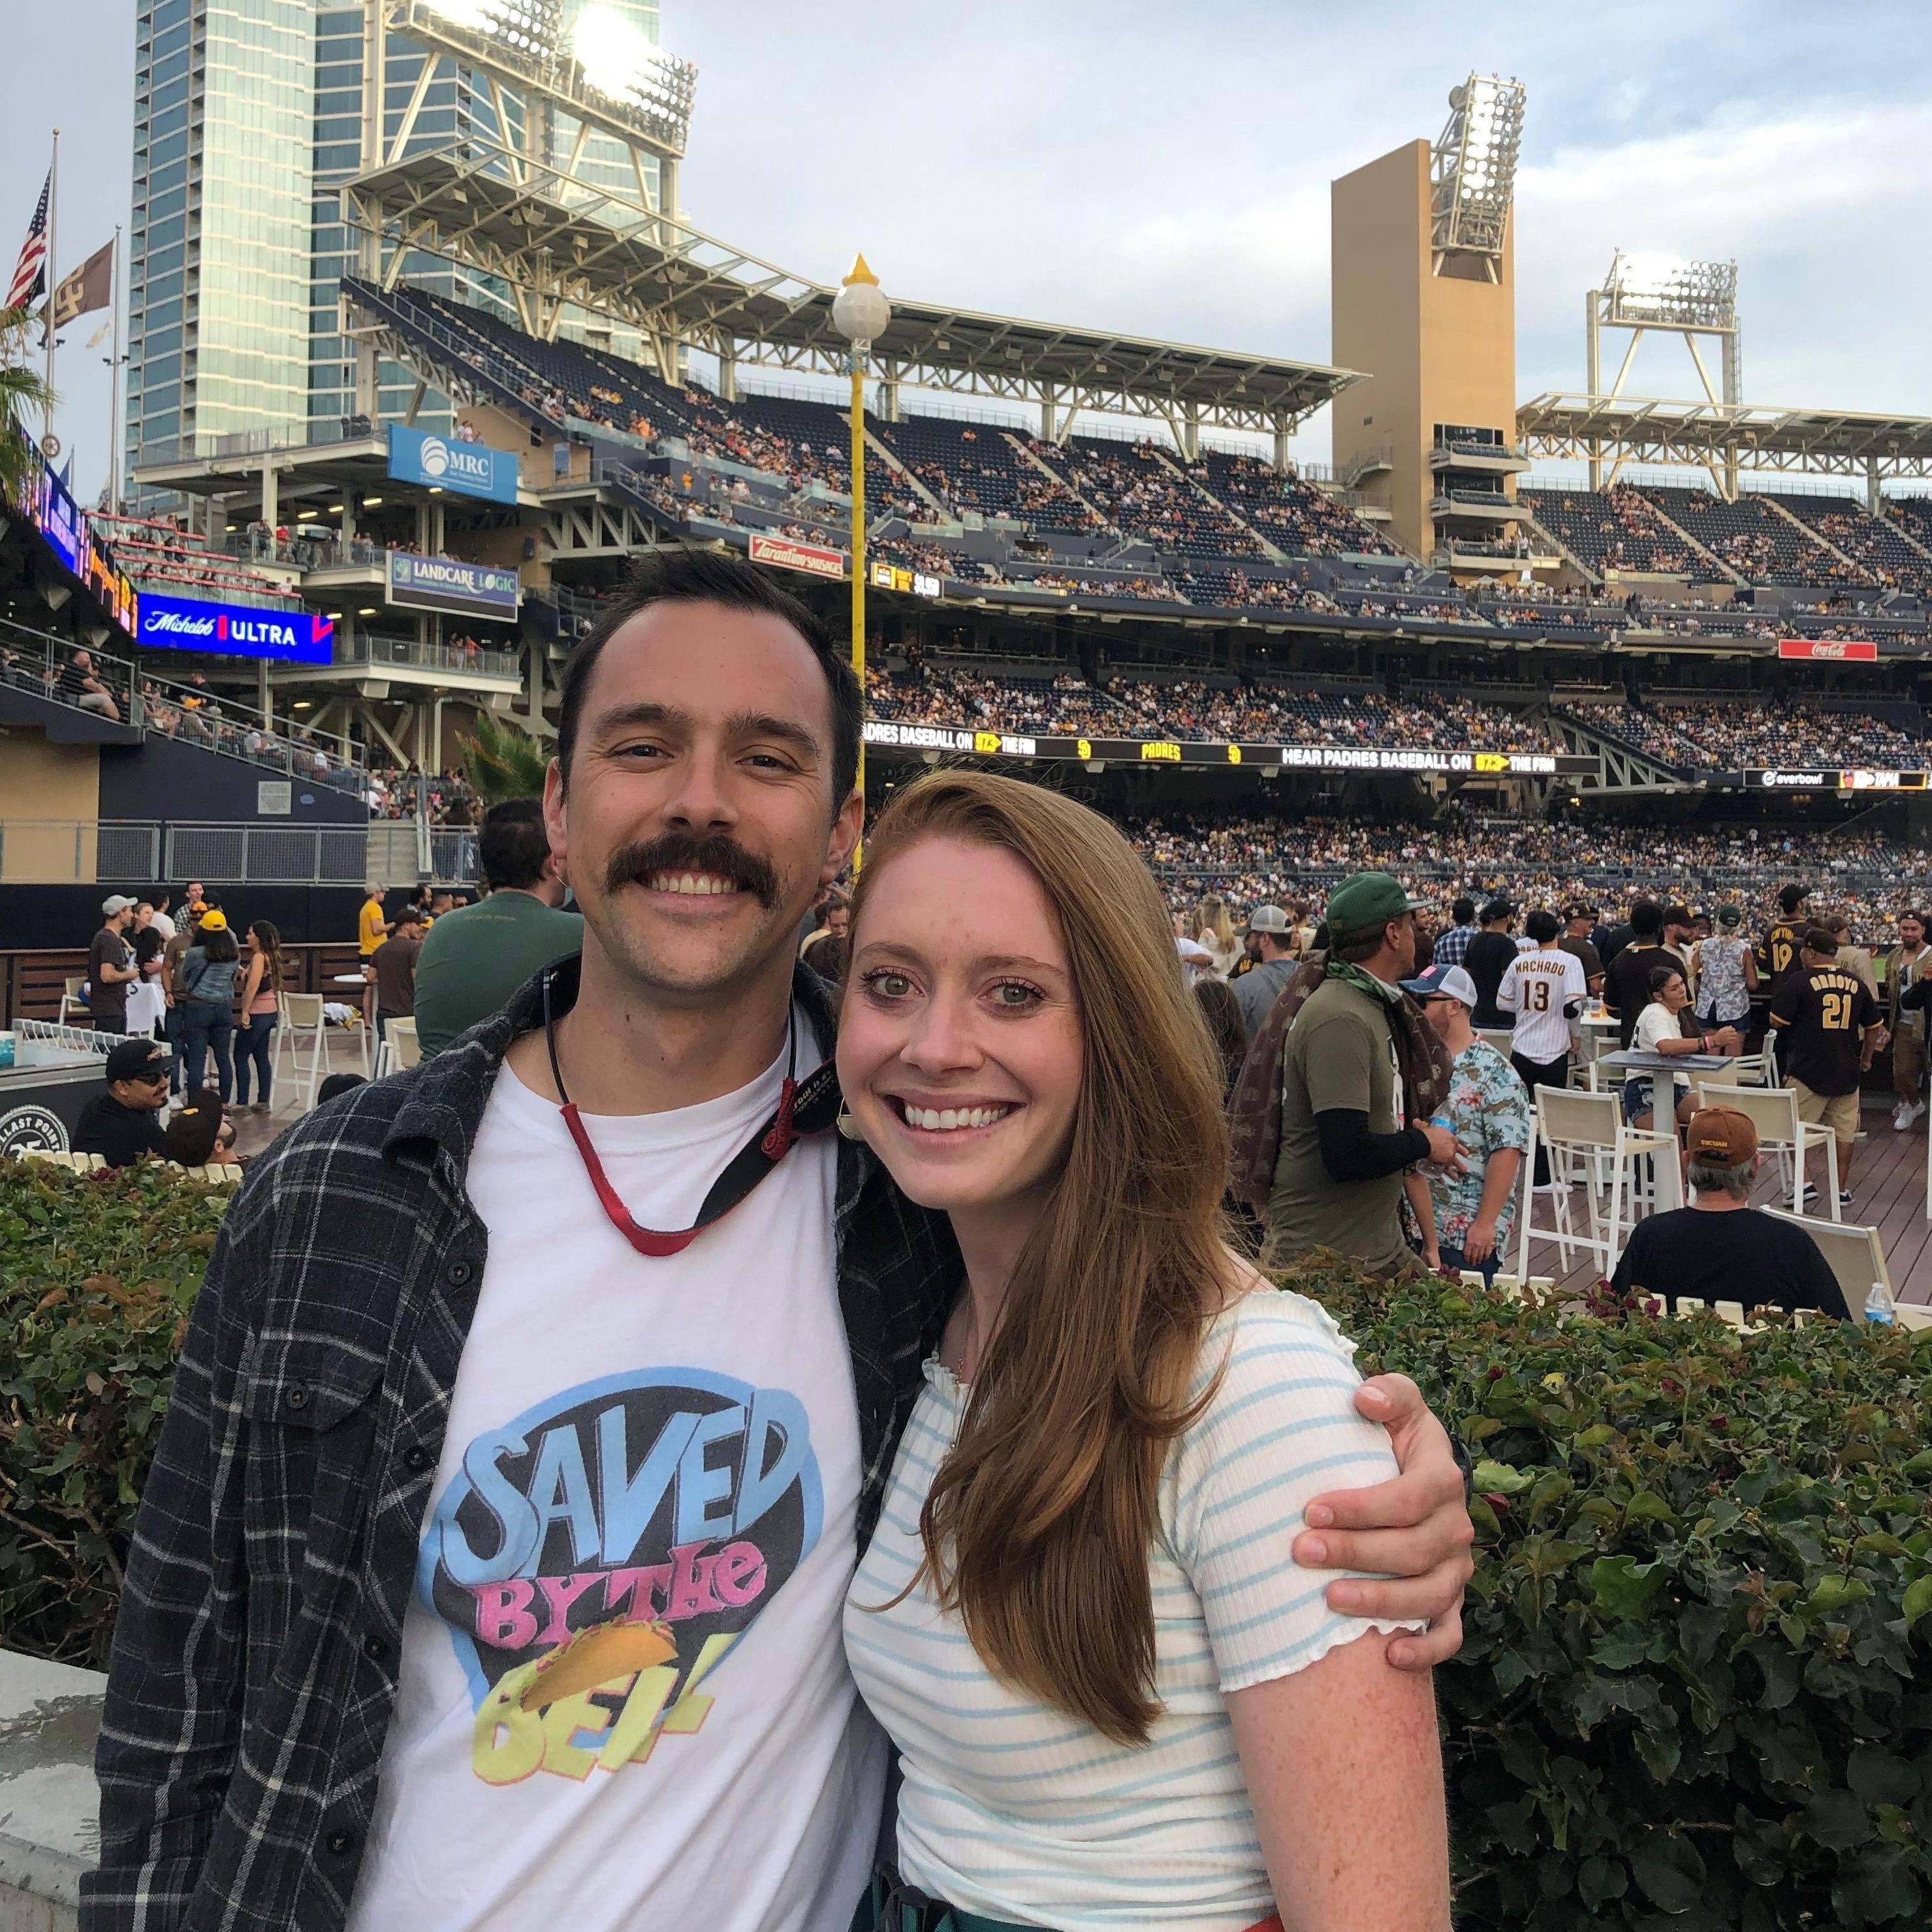 Found this mustached-man at Petco Park.